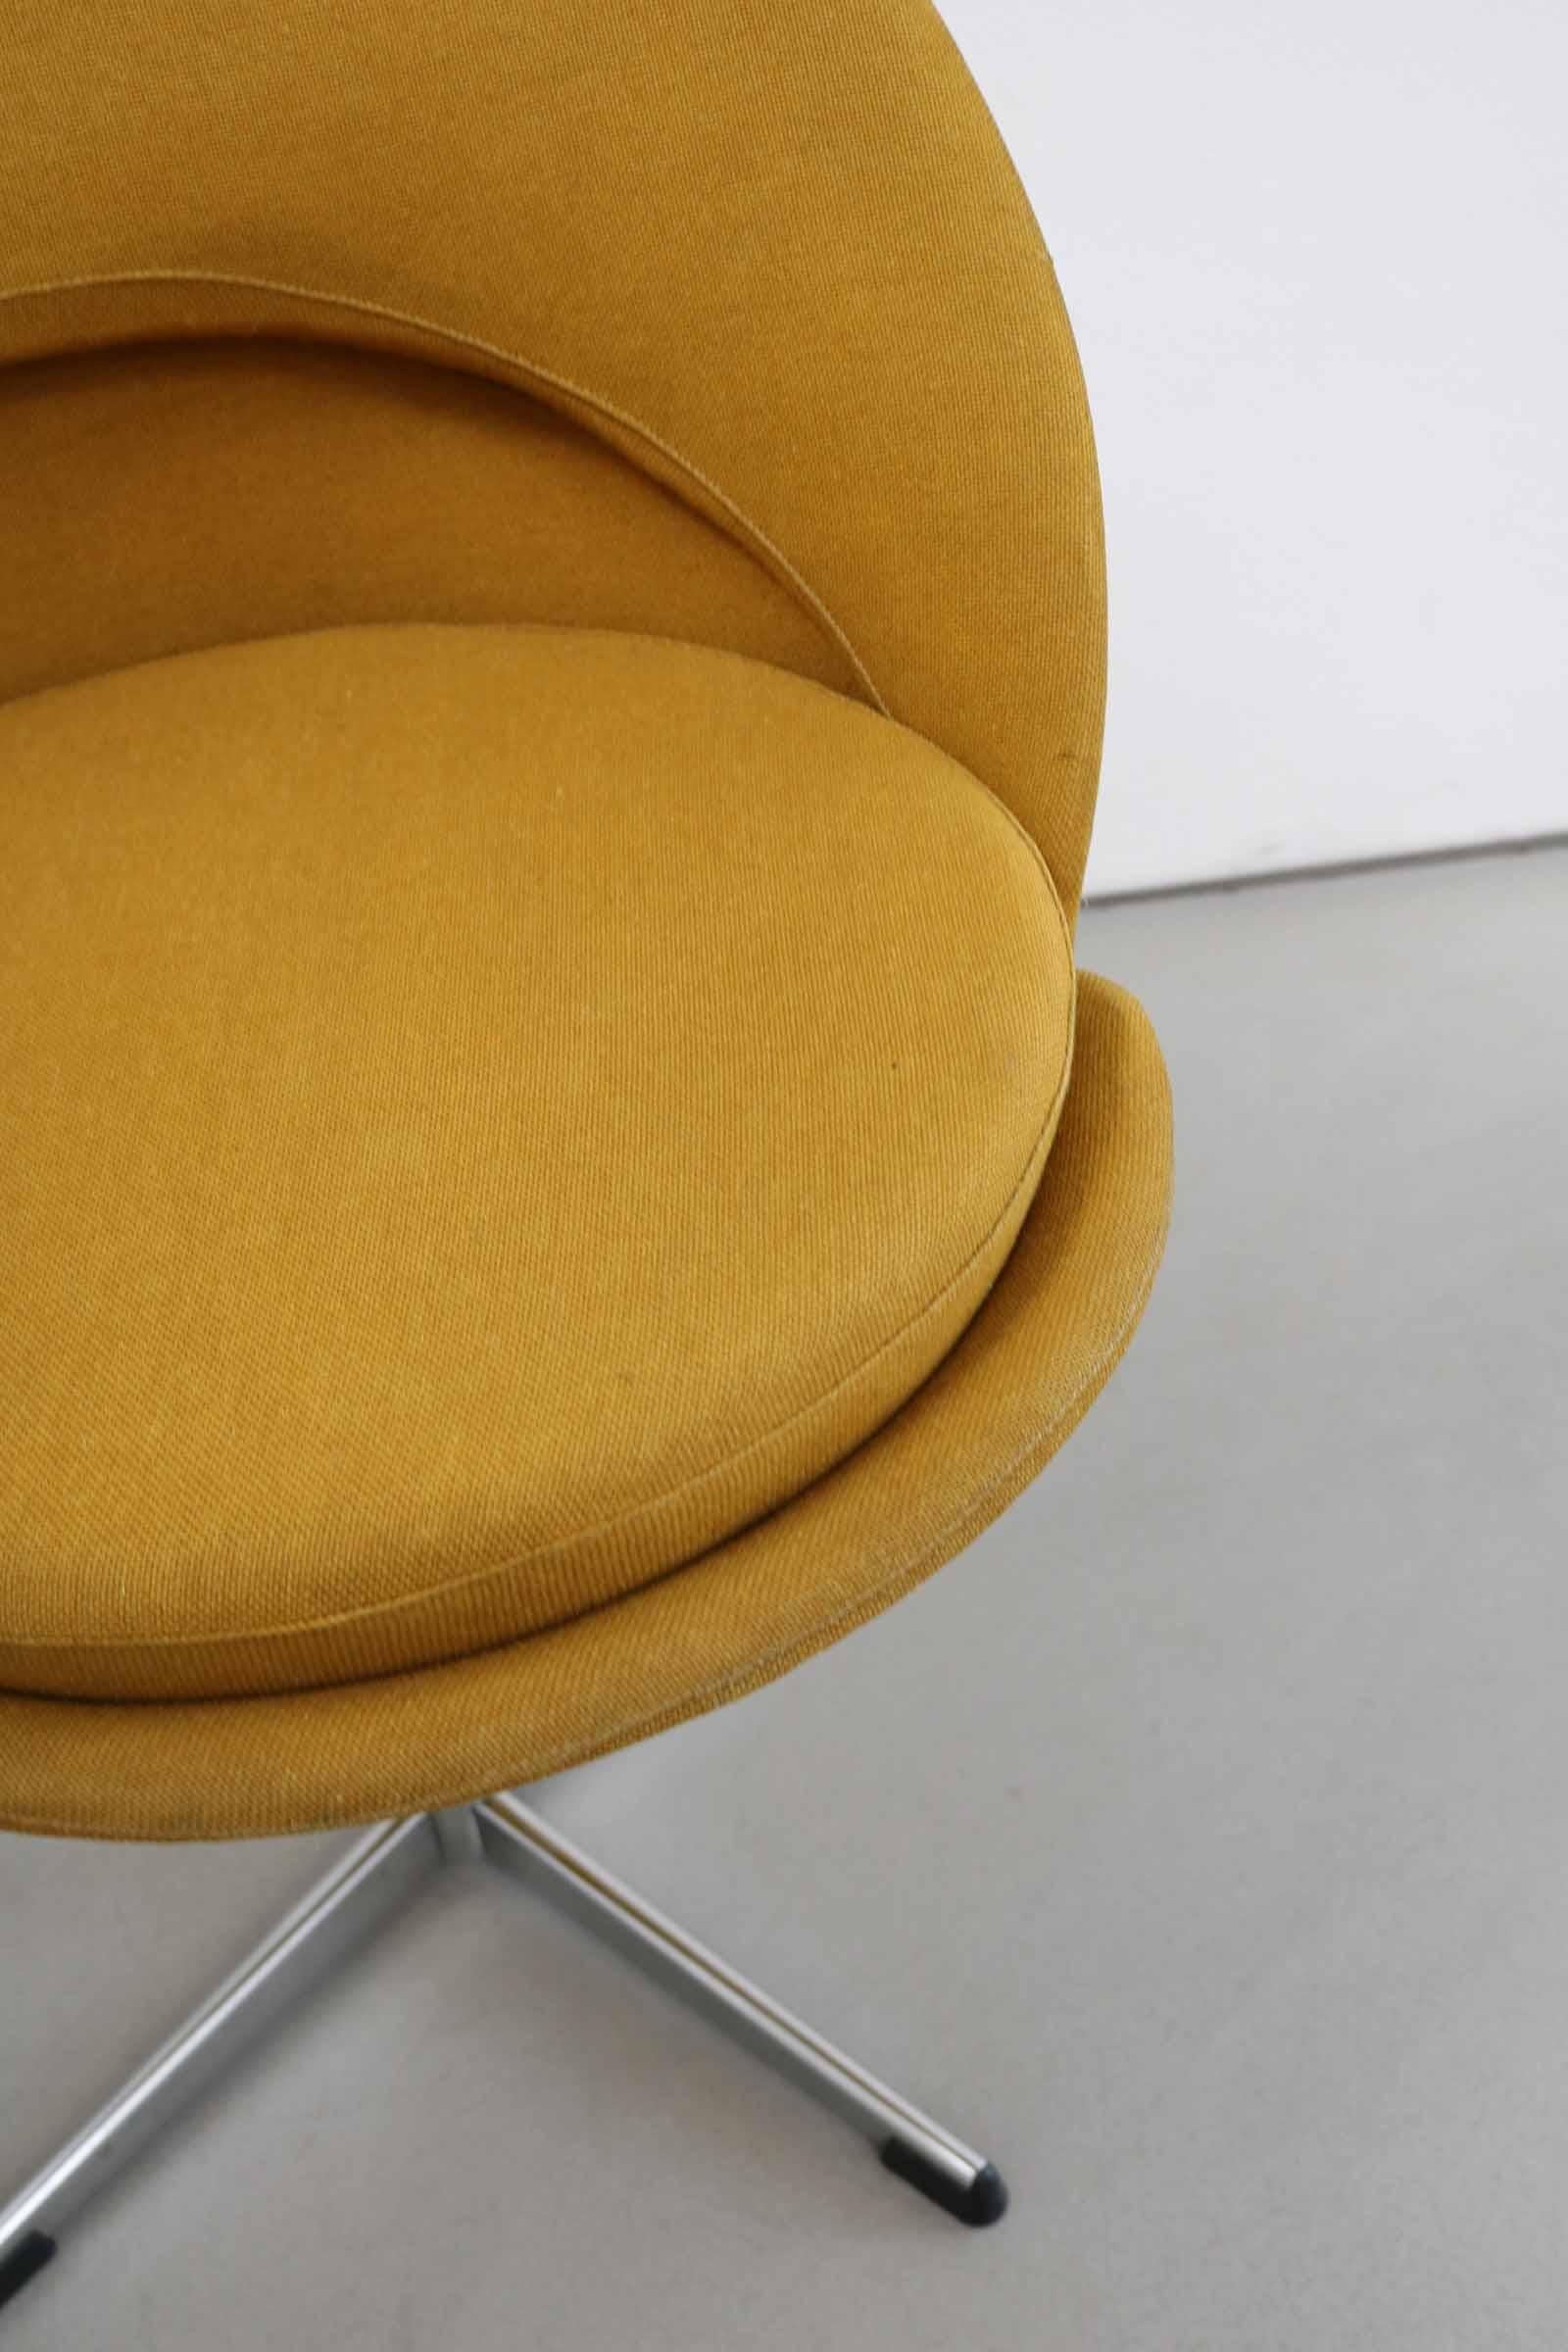 Verner Panton Cone Chair in Original Fabric, Denmark, 1960s For Sale 1